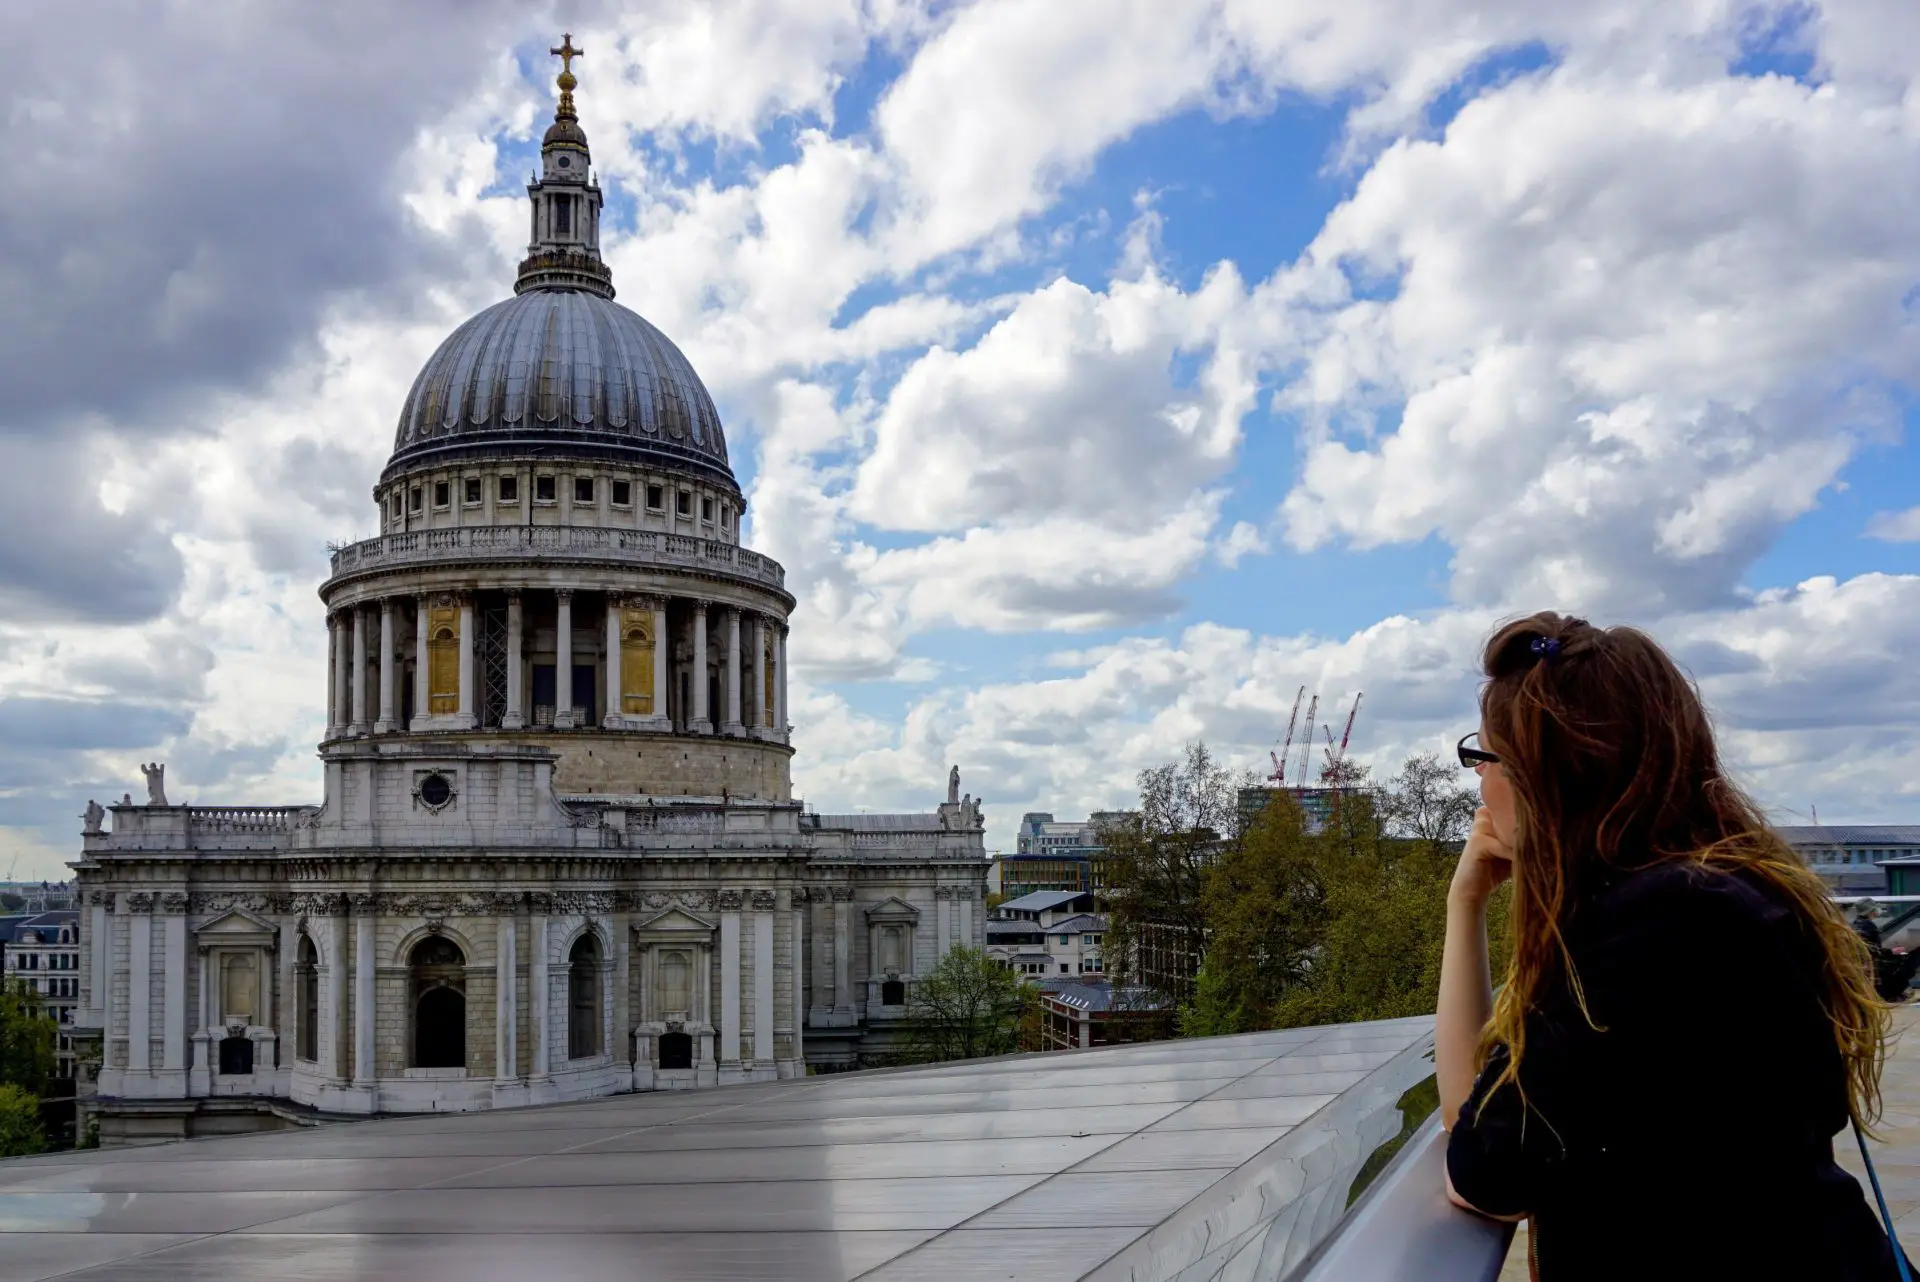 St. Paul's Cathedral, London, UK - Experiencing the Globe